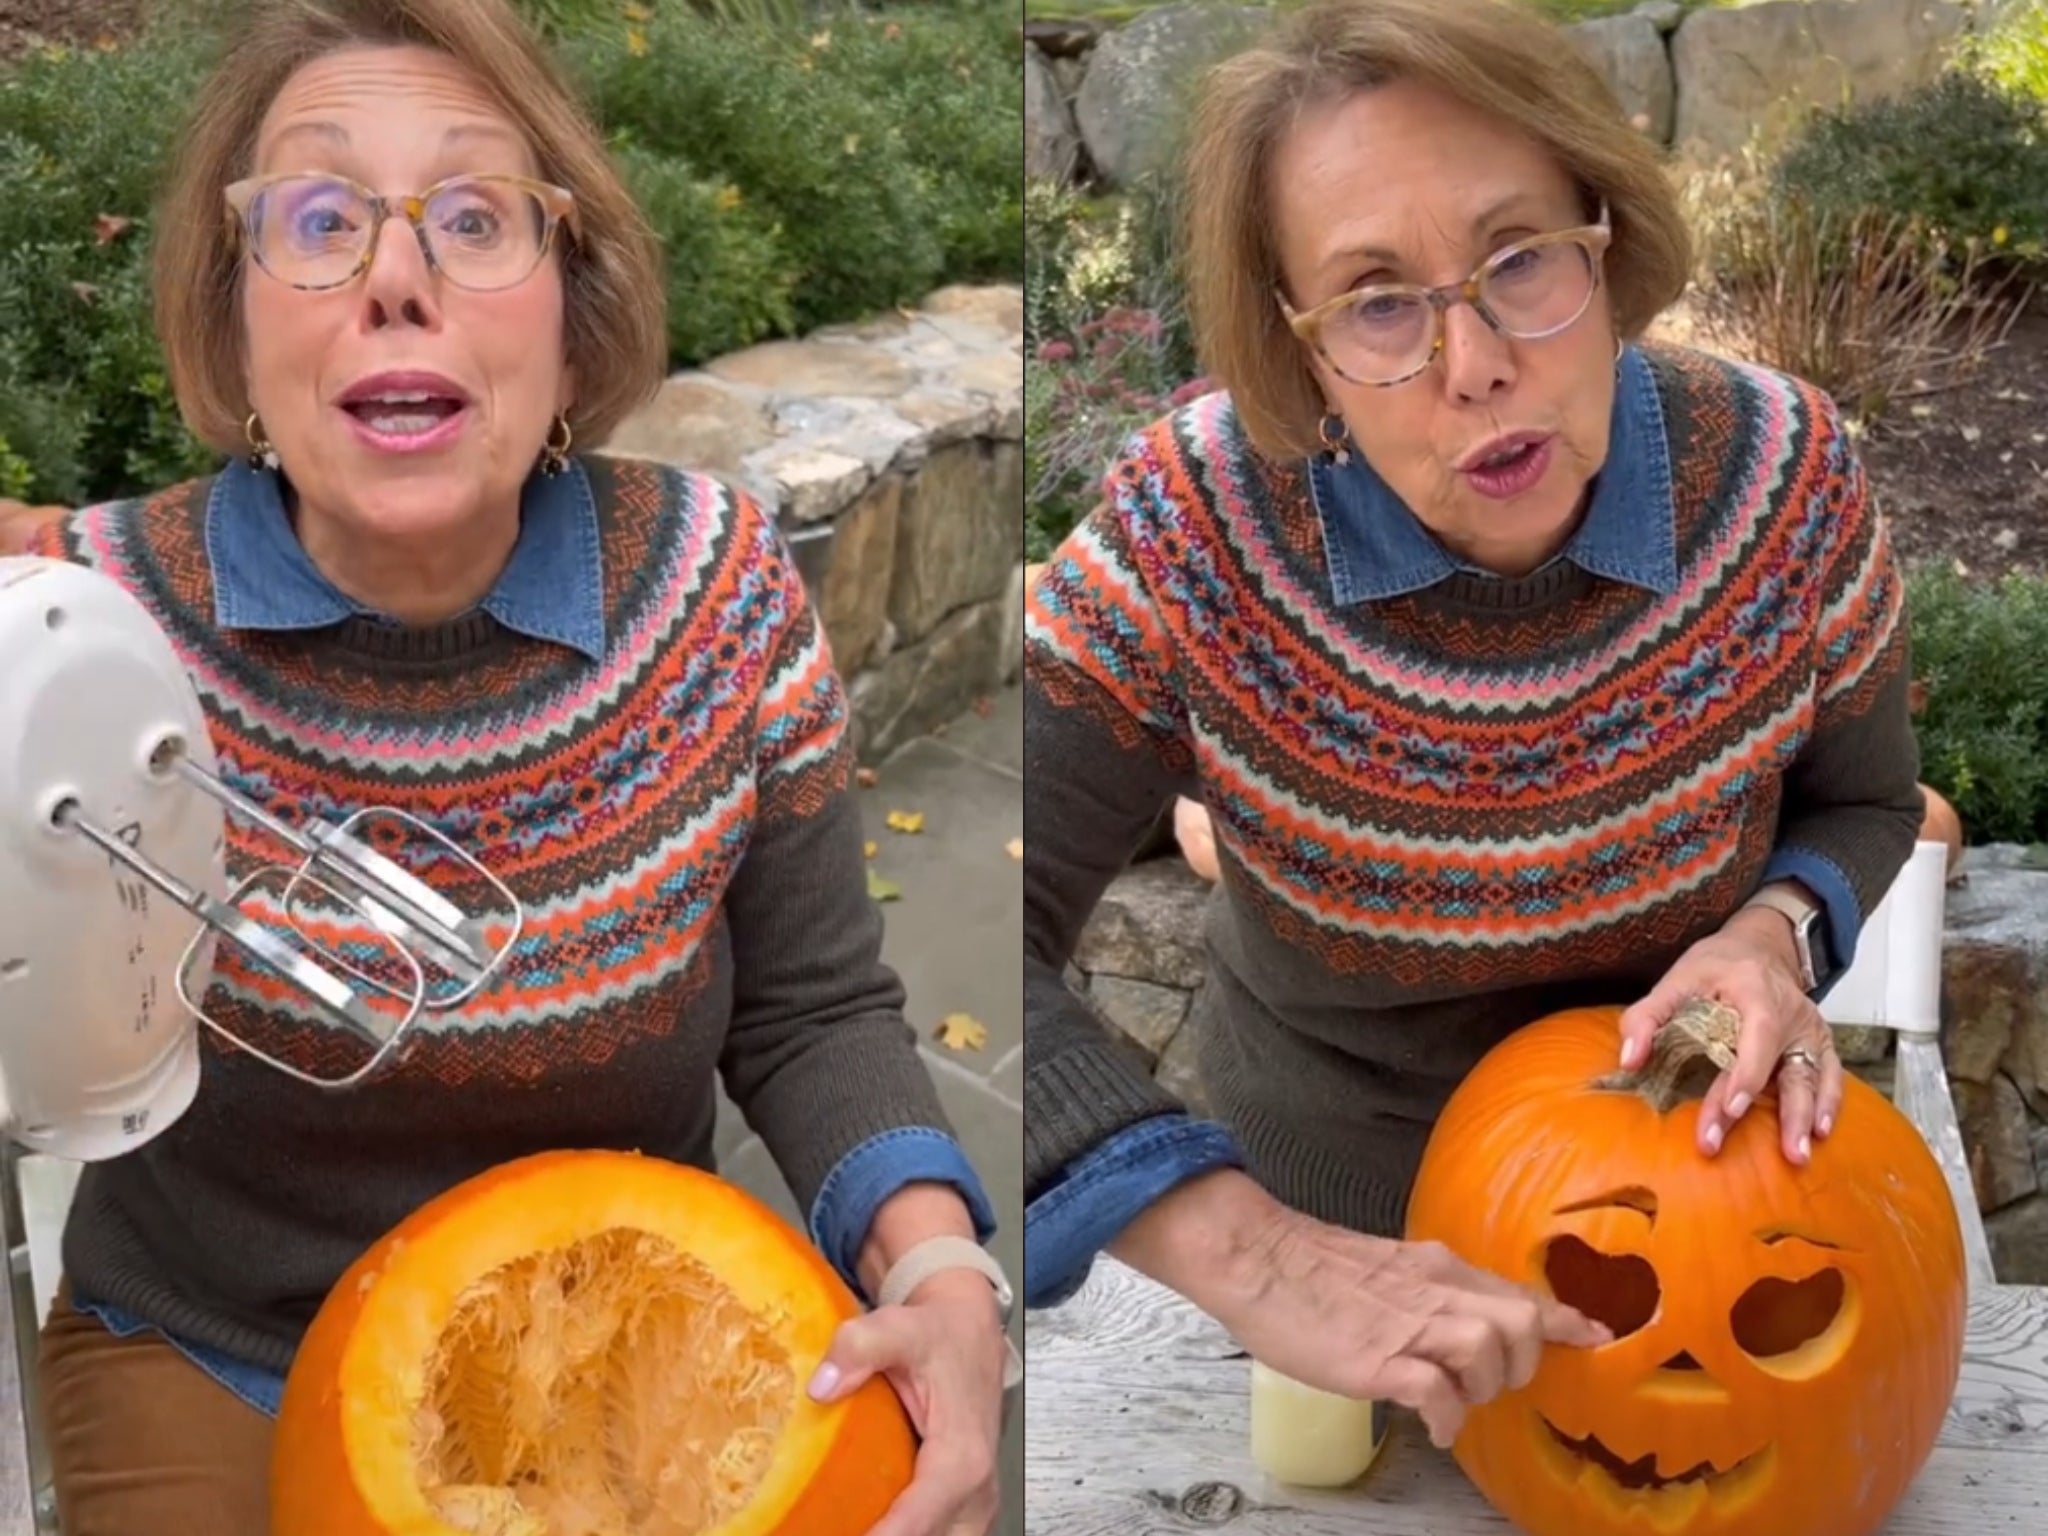 Barbara Costello shows her fans how to carve a pumpkin efficiently